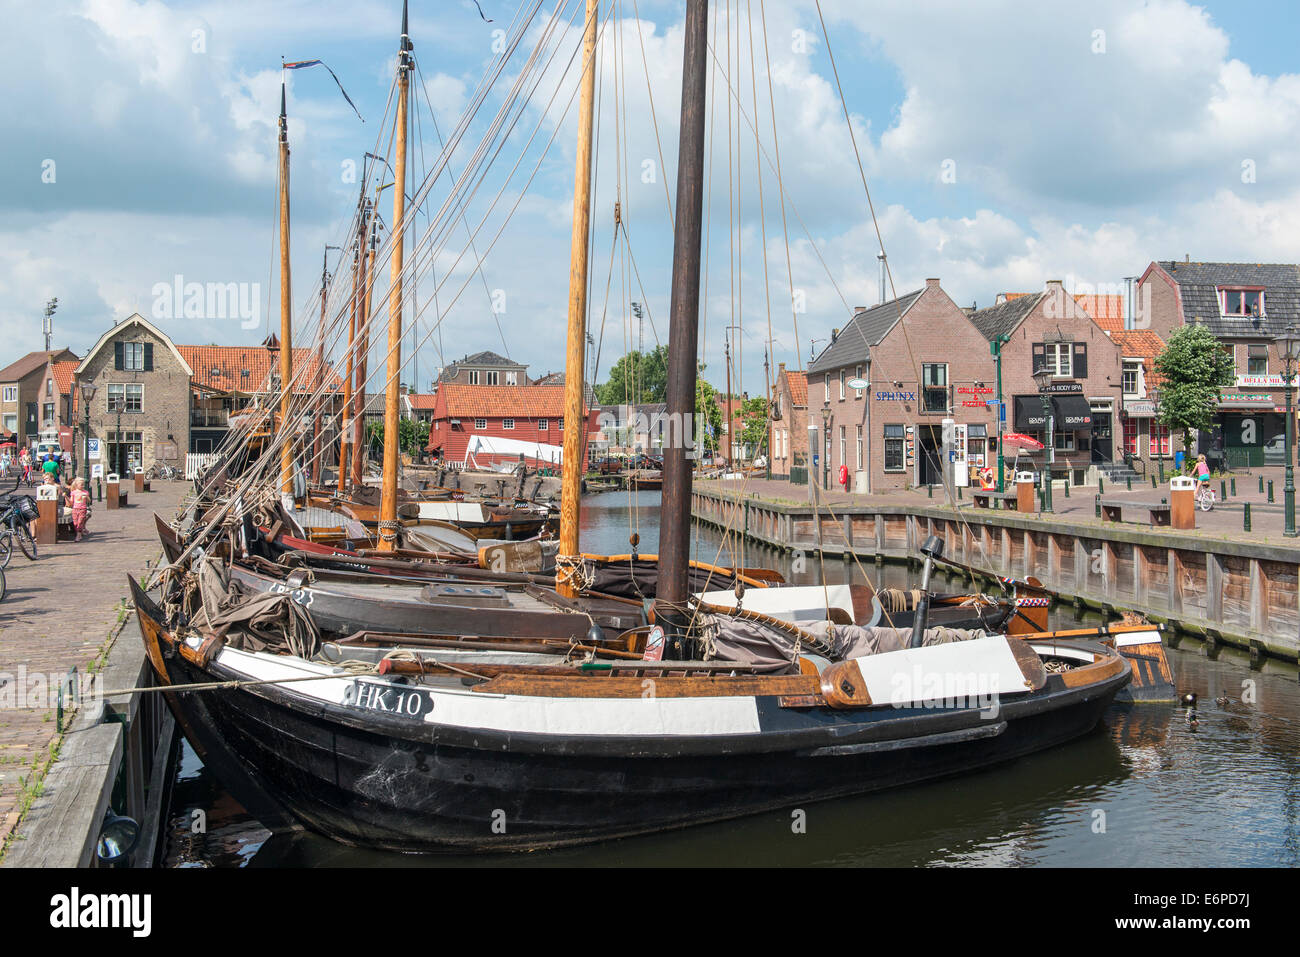 Largest historical fleet of botters (a type of fishing boat), in Bunschoten-.Spakenburg, Netherlands Stock Photo